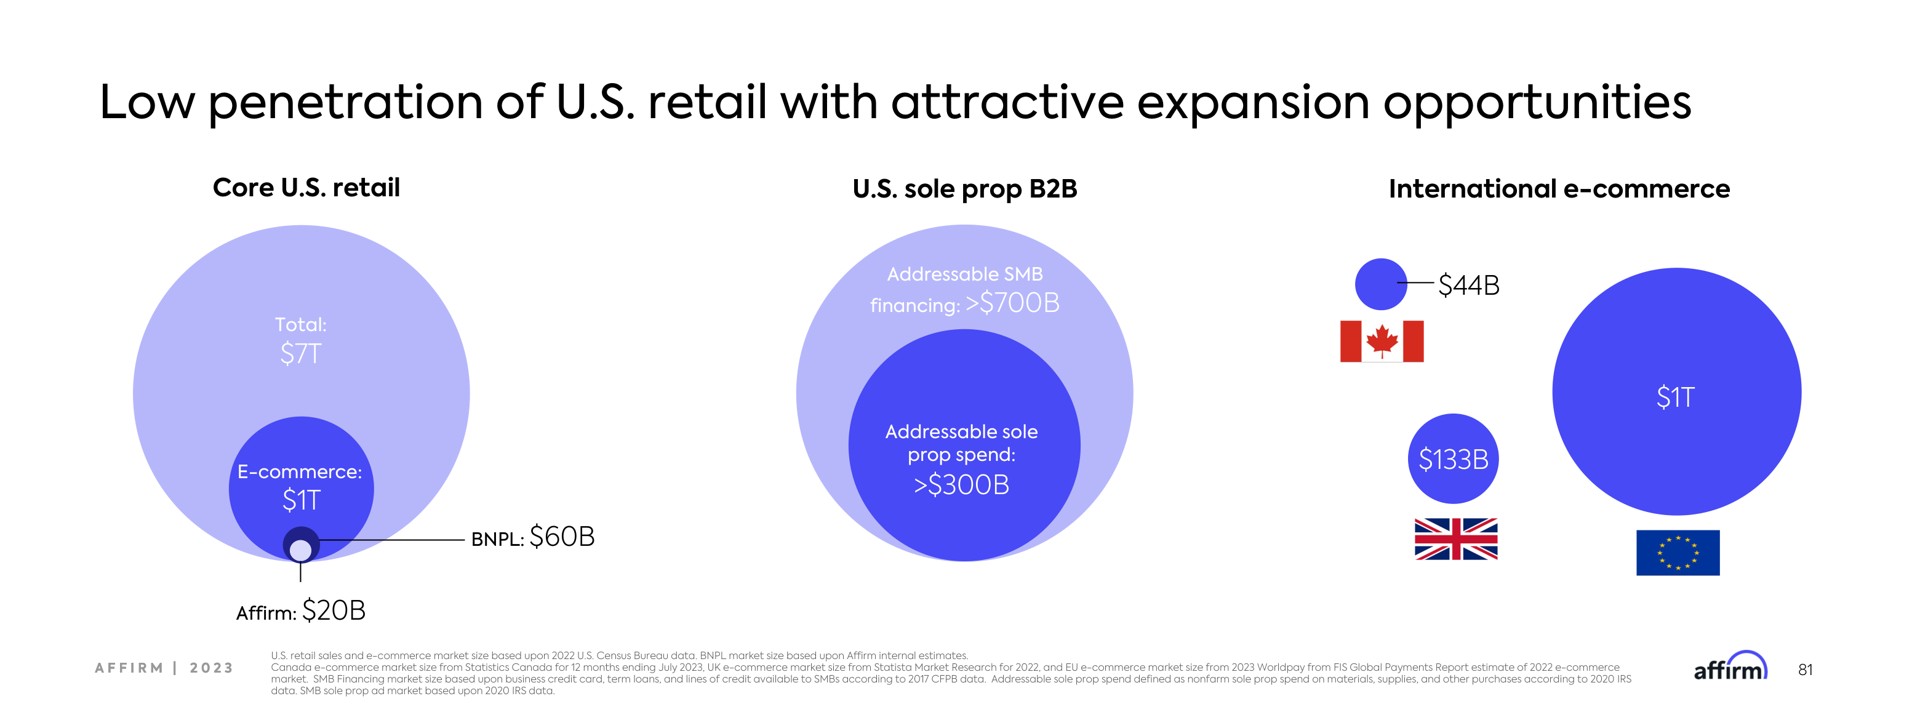 low penetration of retail with attractive expansion opportunities | Affirm